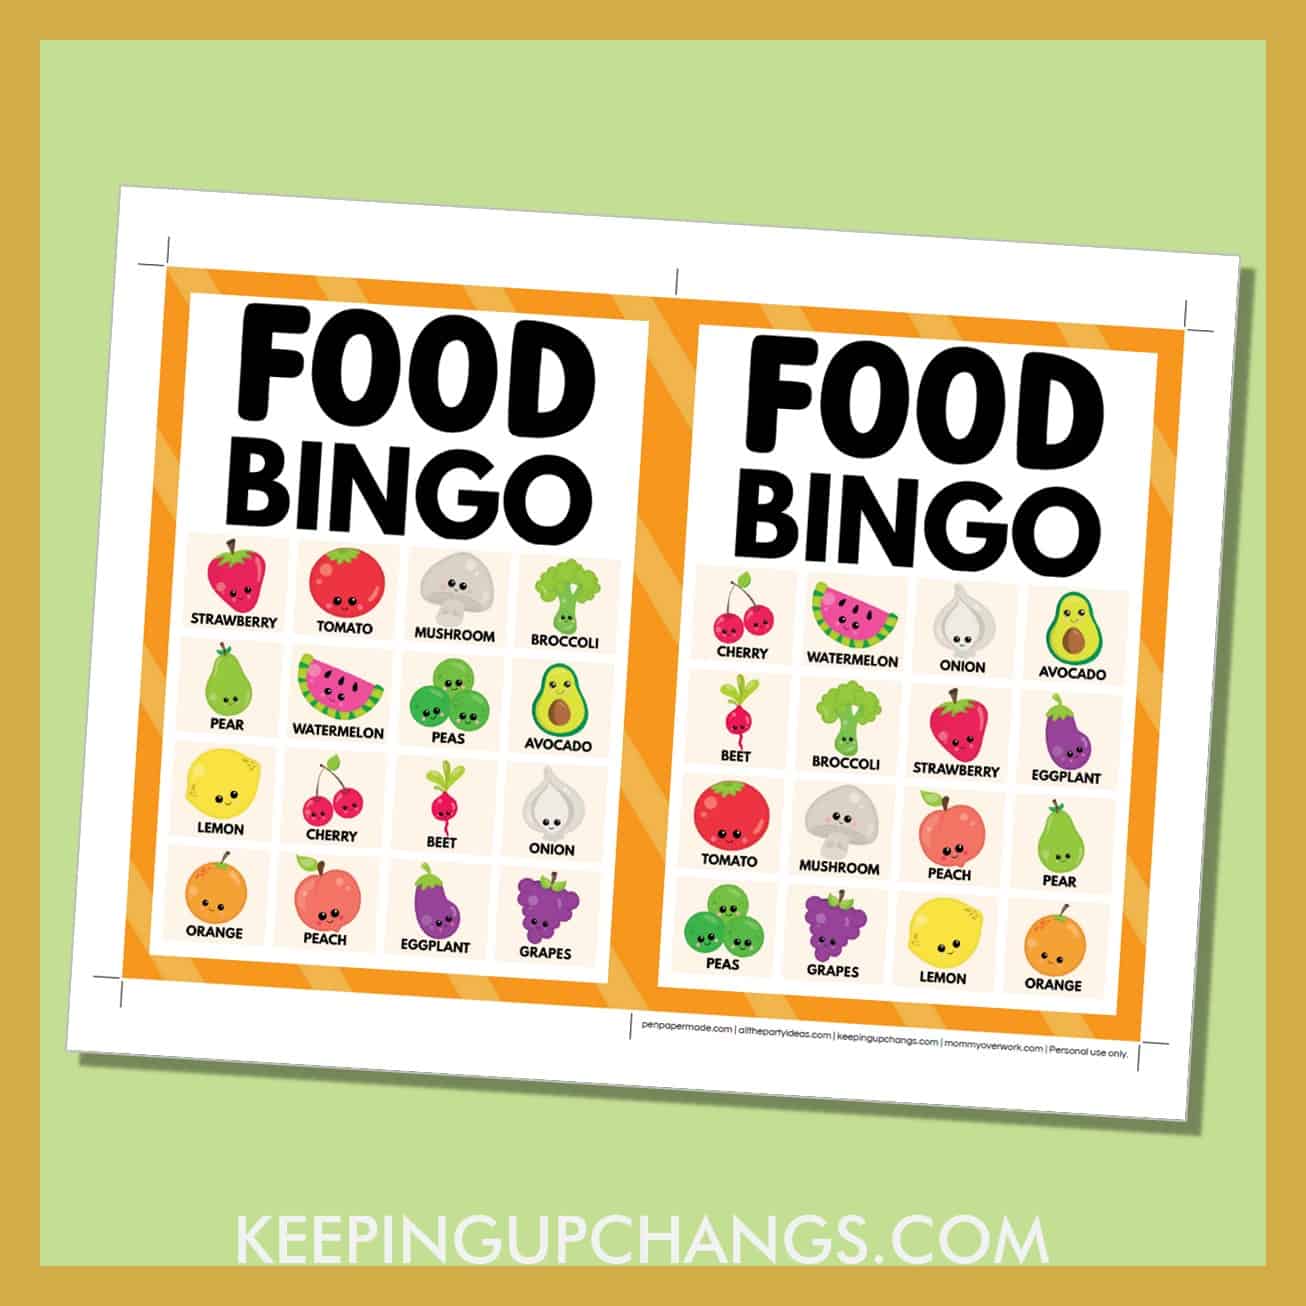 free food bingo card 4x4 5x7 game boards with images and text words.